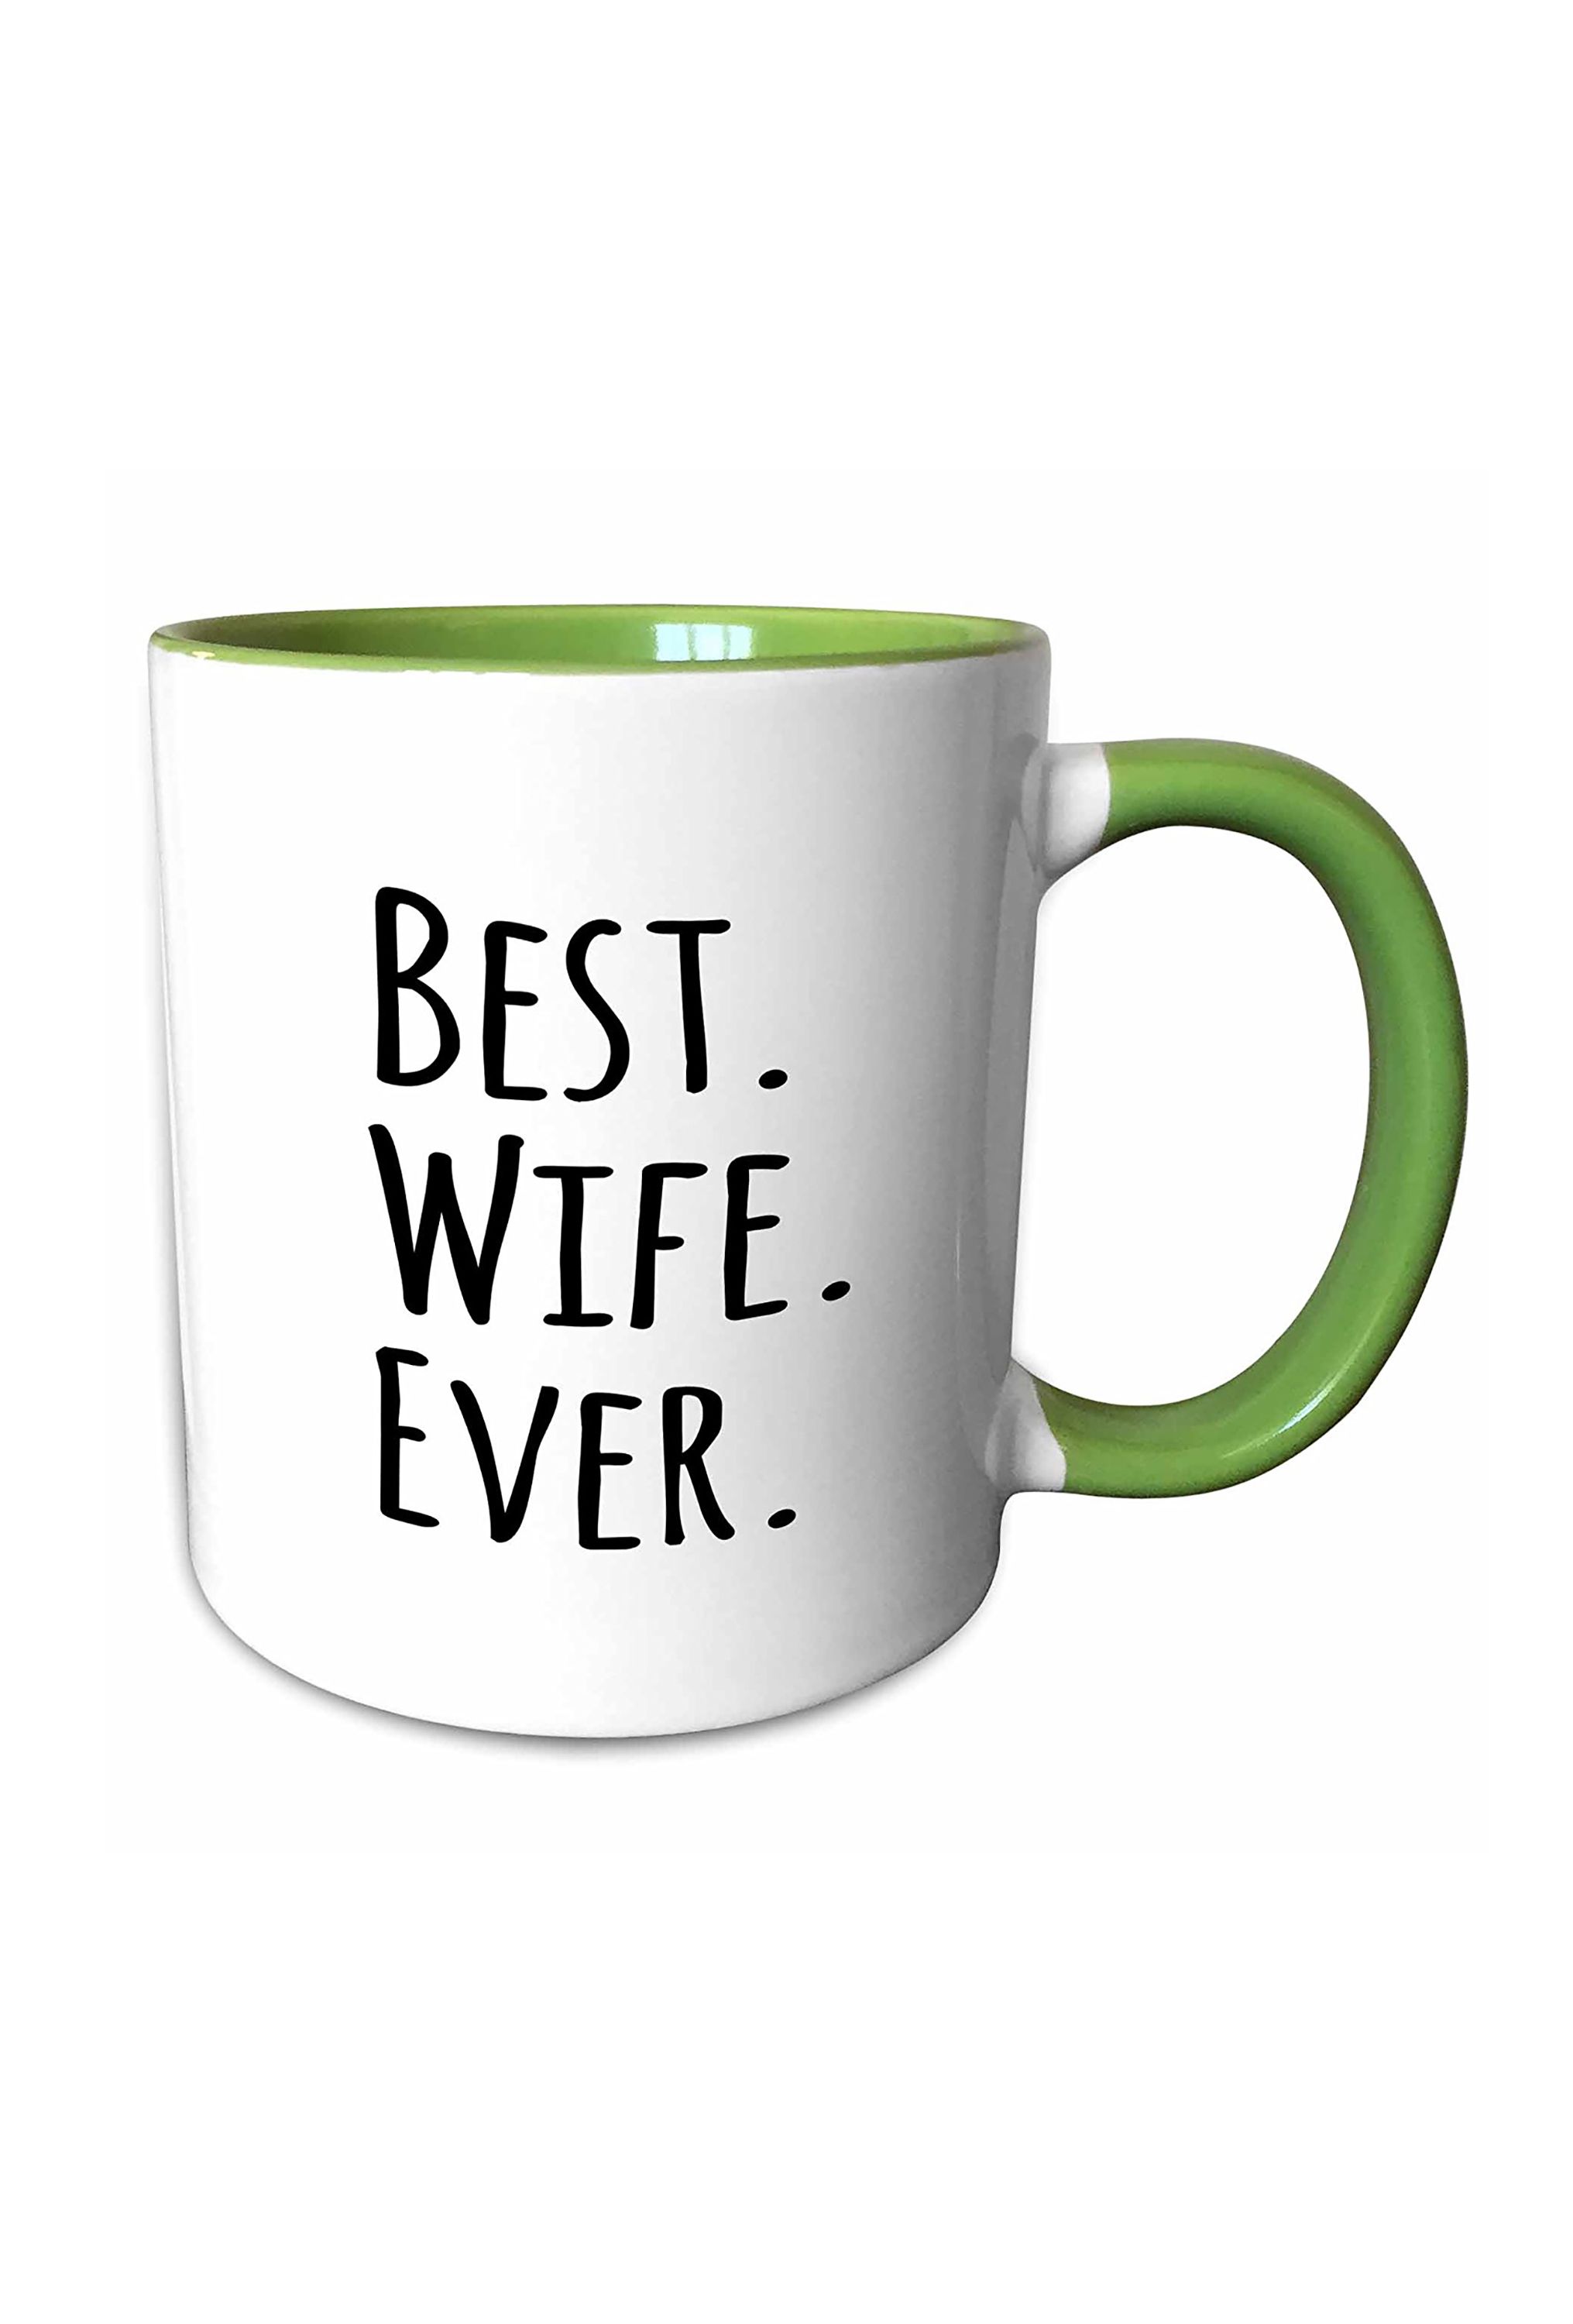 perfect gift for wife on wedding anniversary